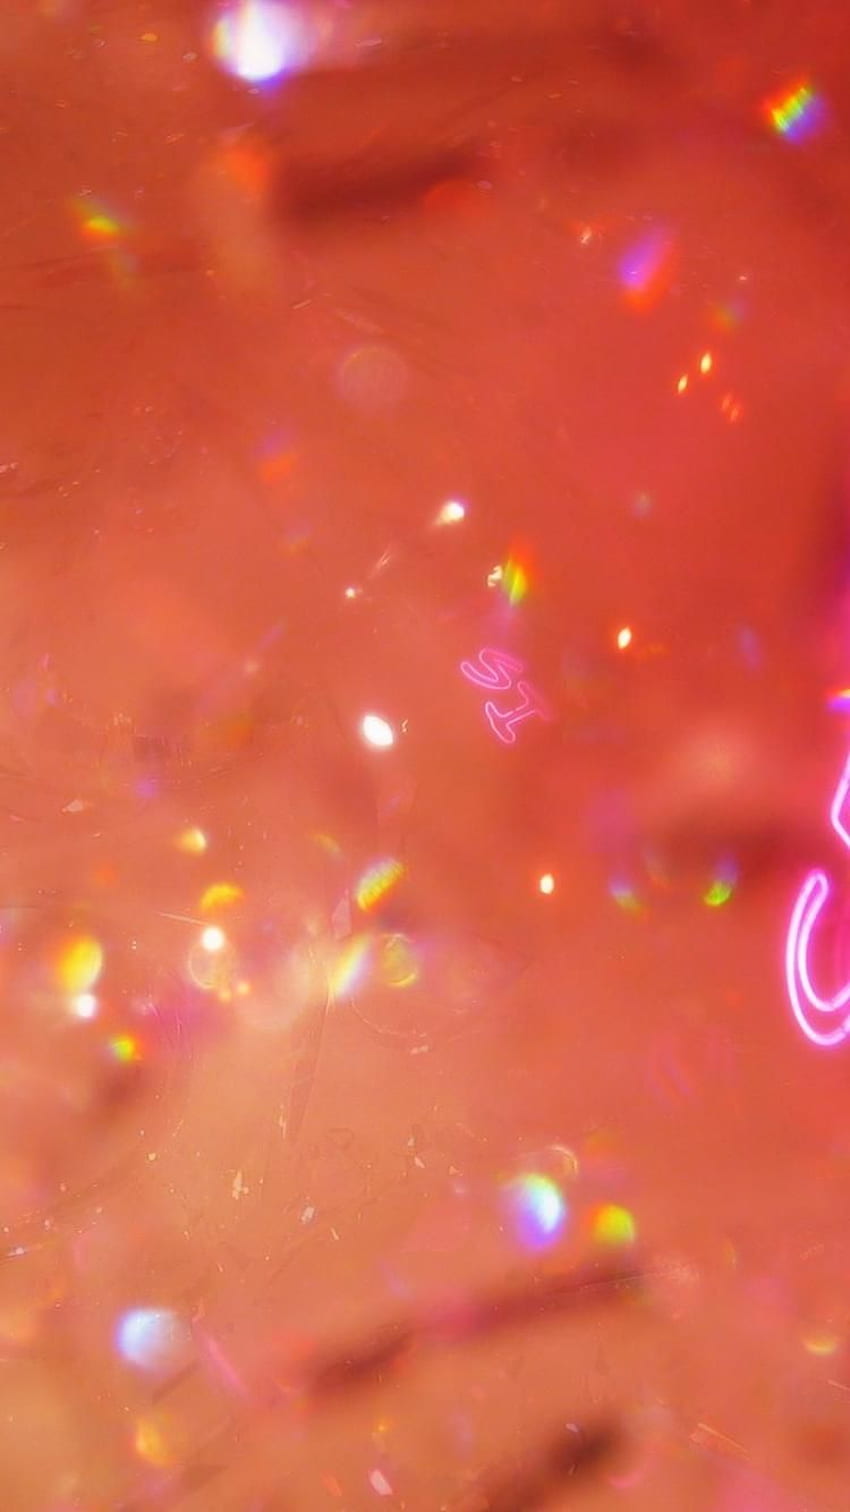 A close up of a pink wall with rainbow lights shining on it - Neon orange